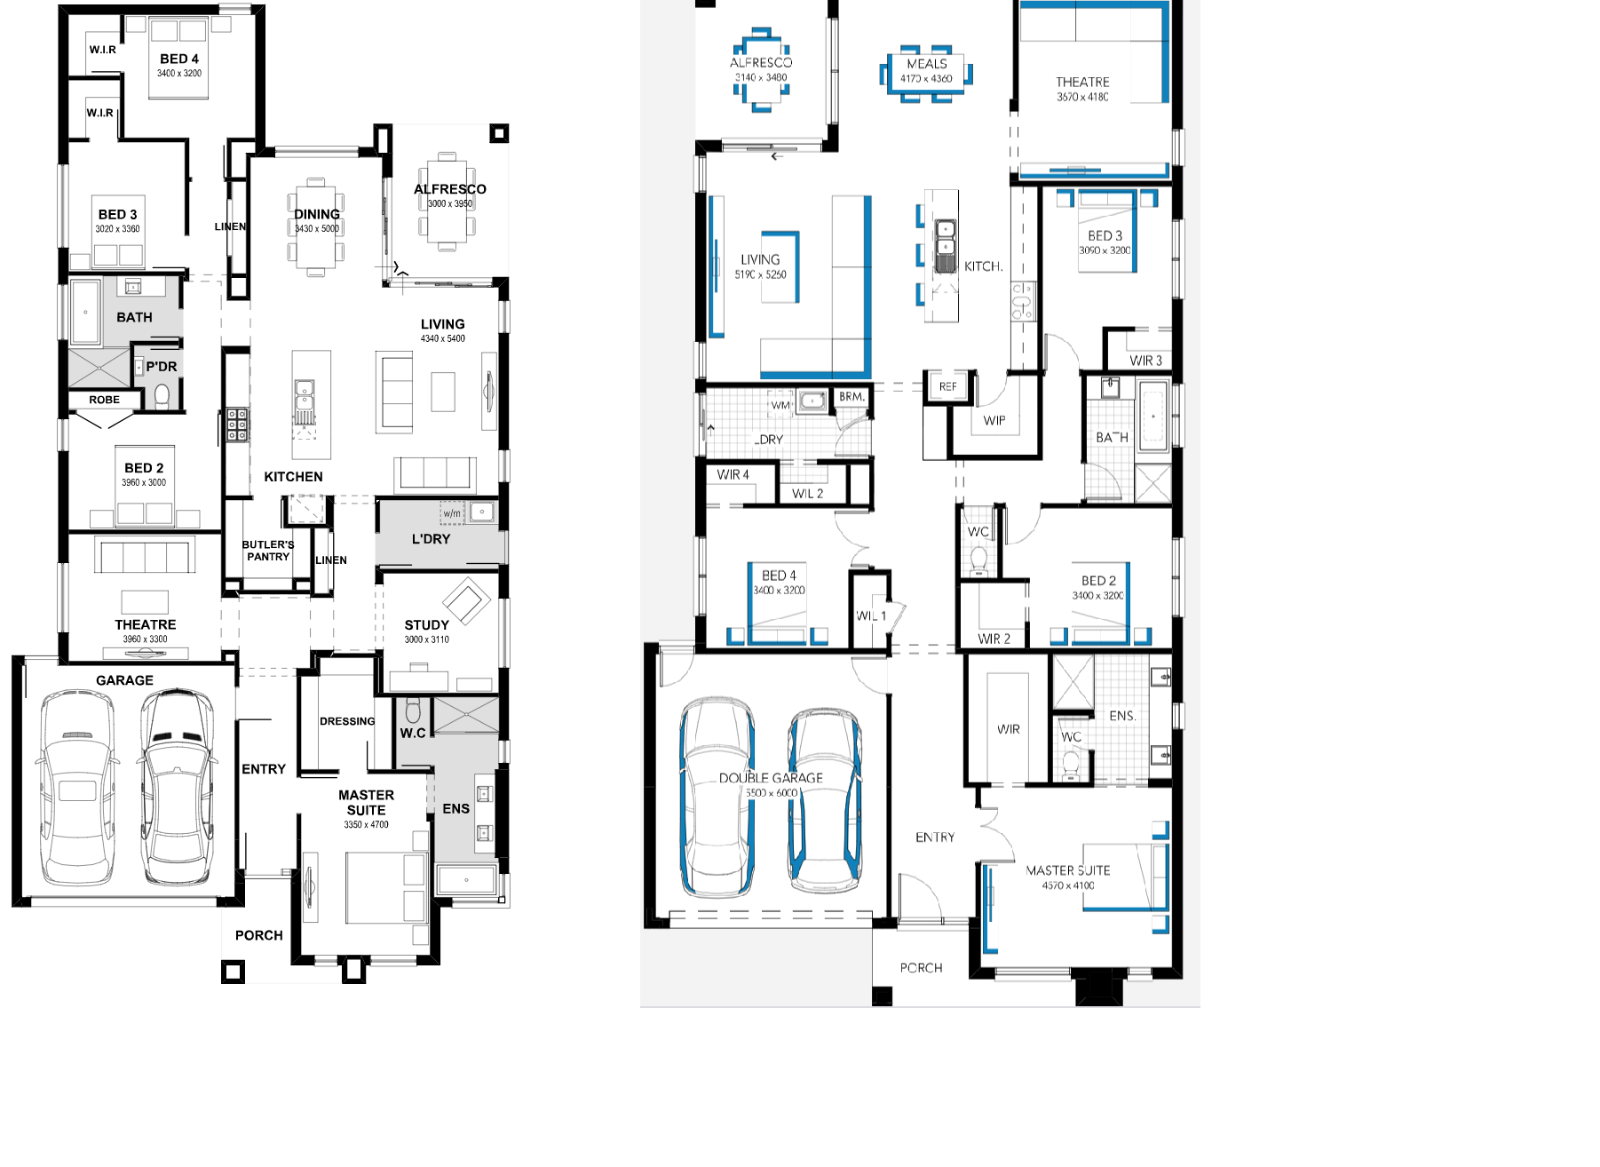 Which floor plan is better?